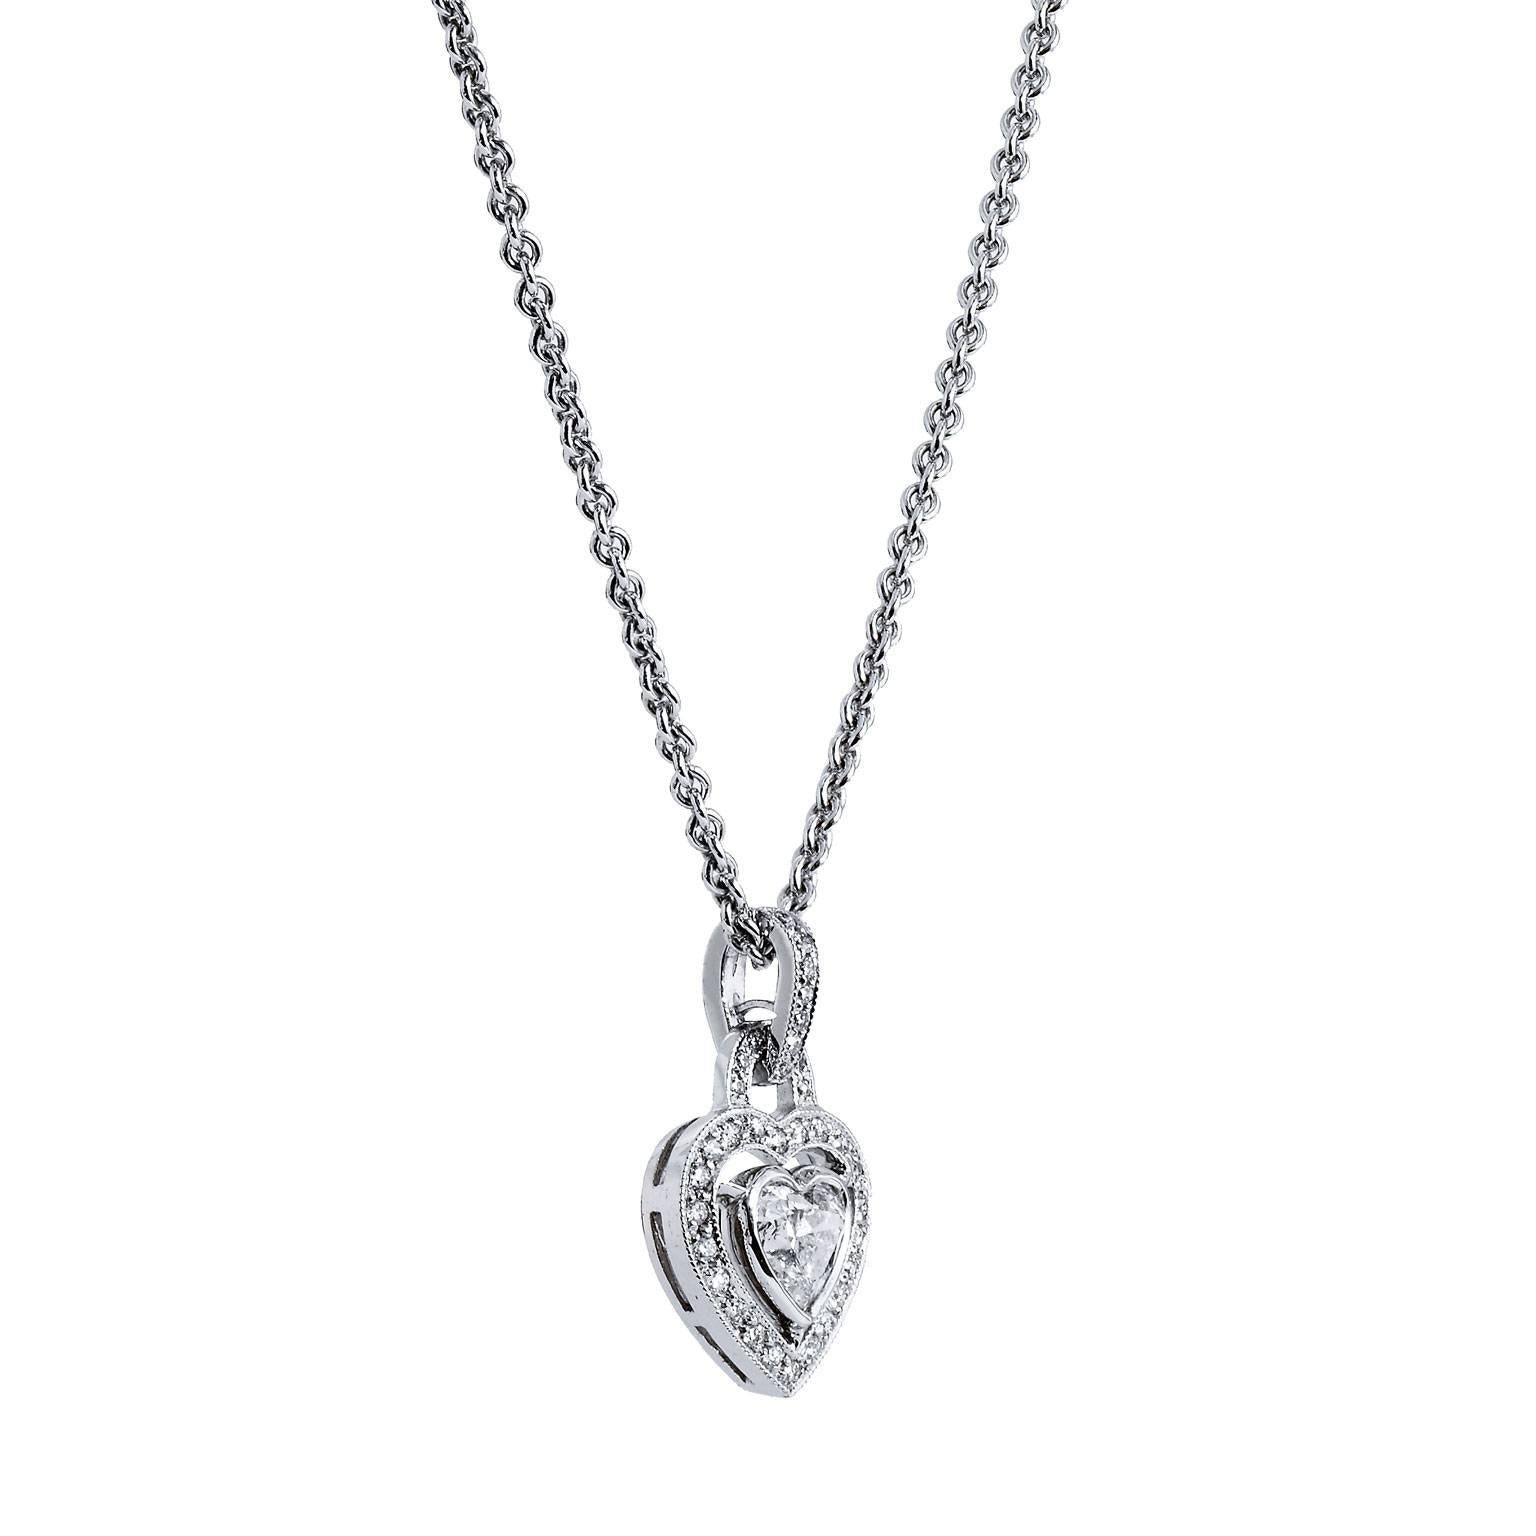 The heart, a symbol of not only deep love and affection but also, the beauty that lies at the core of one’s being. Let this handmade pendant exemplify your presence.  Thirty-six pieces of diamonds, weighing 0.19 carats, are pave set around an 18